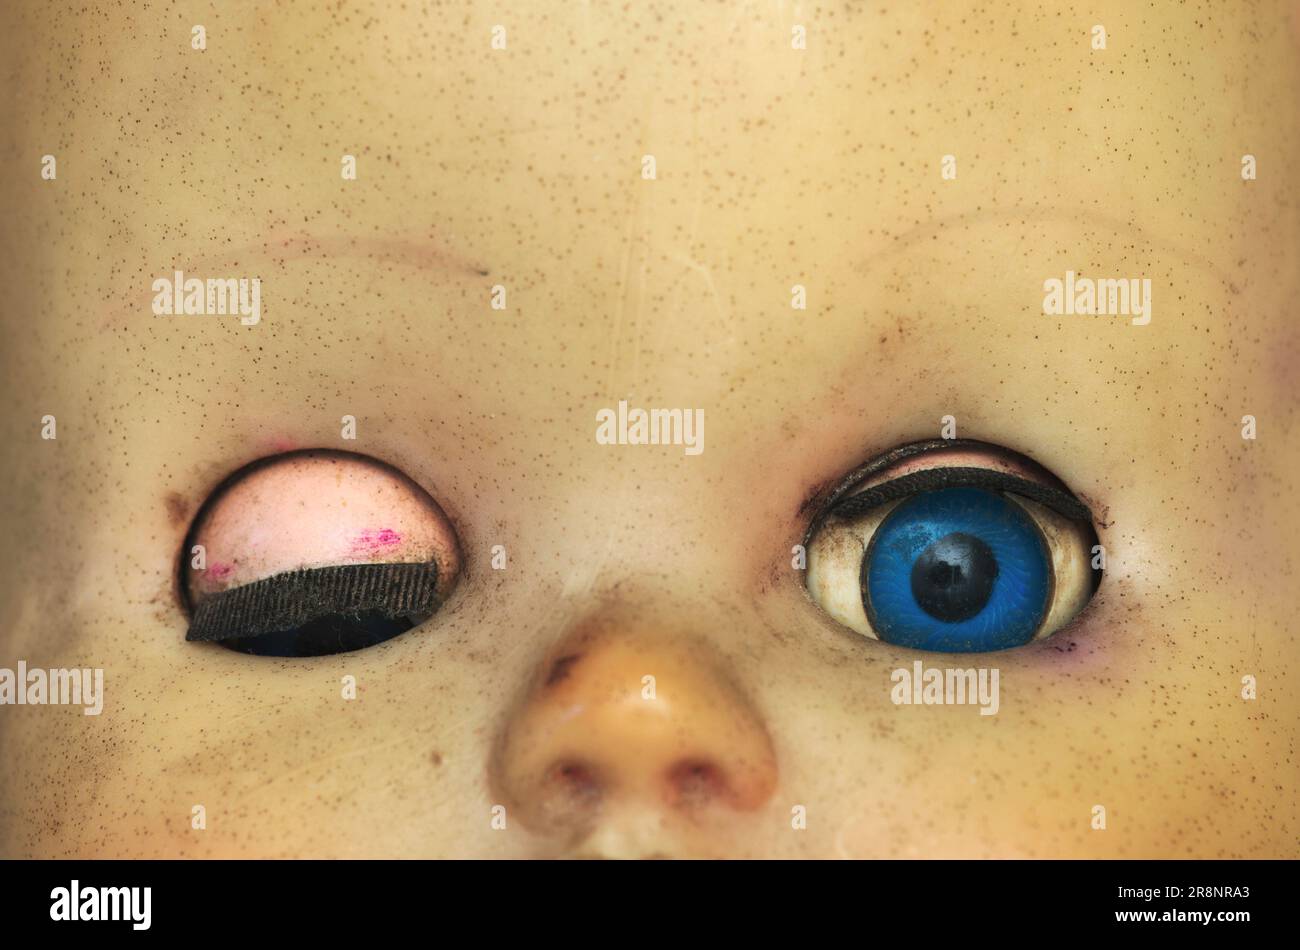 old baby doll doll with one eye closed and one eye opened Stock Photo